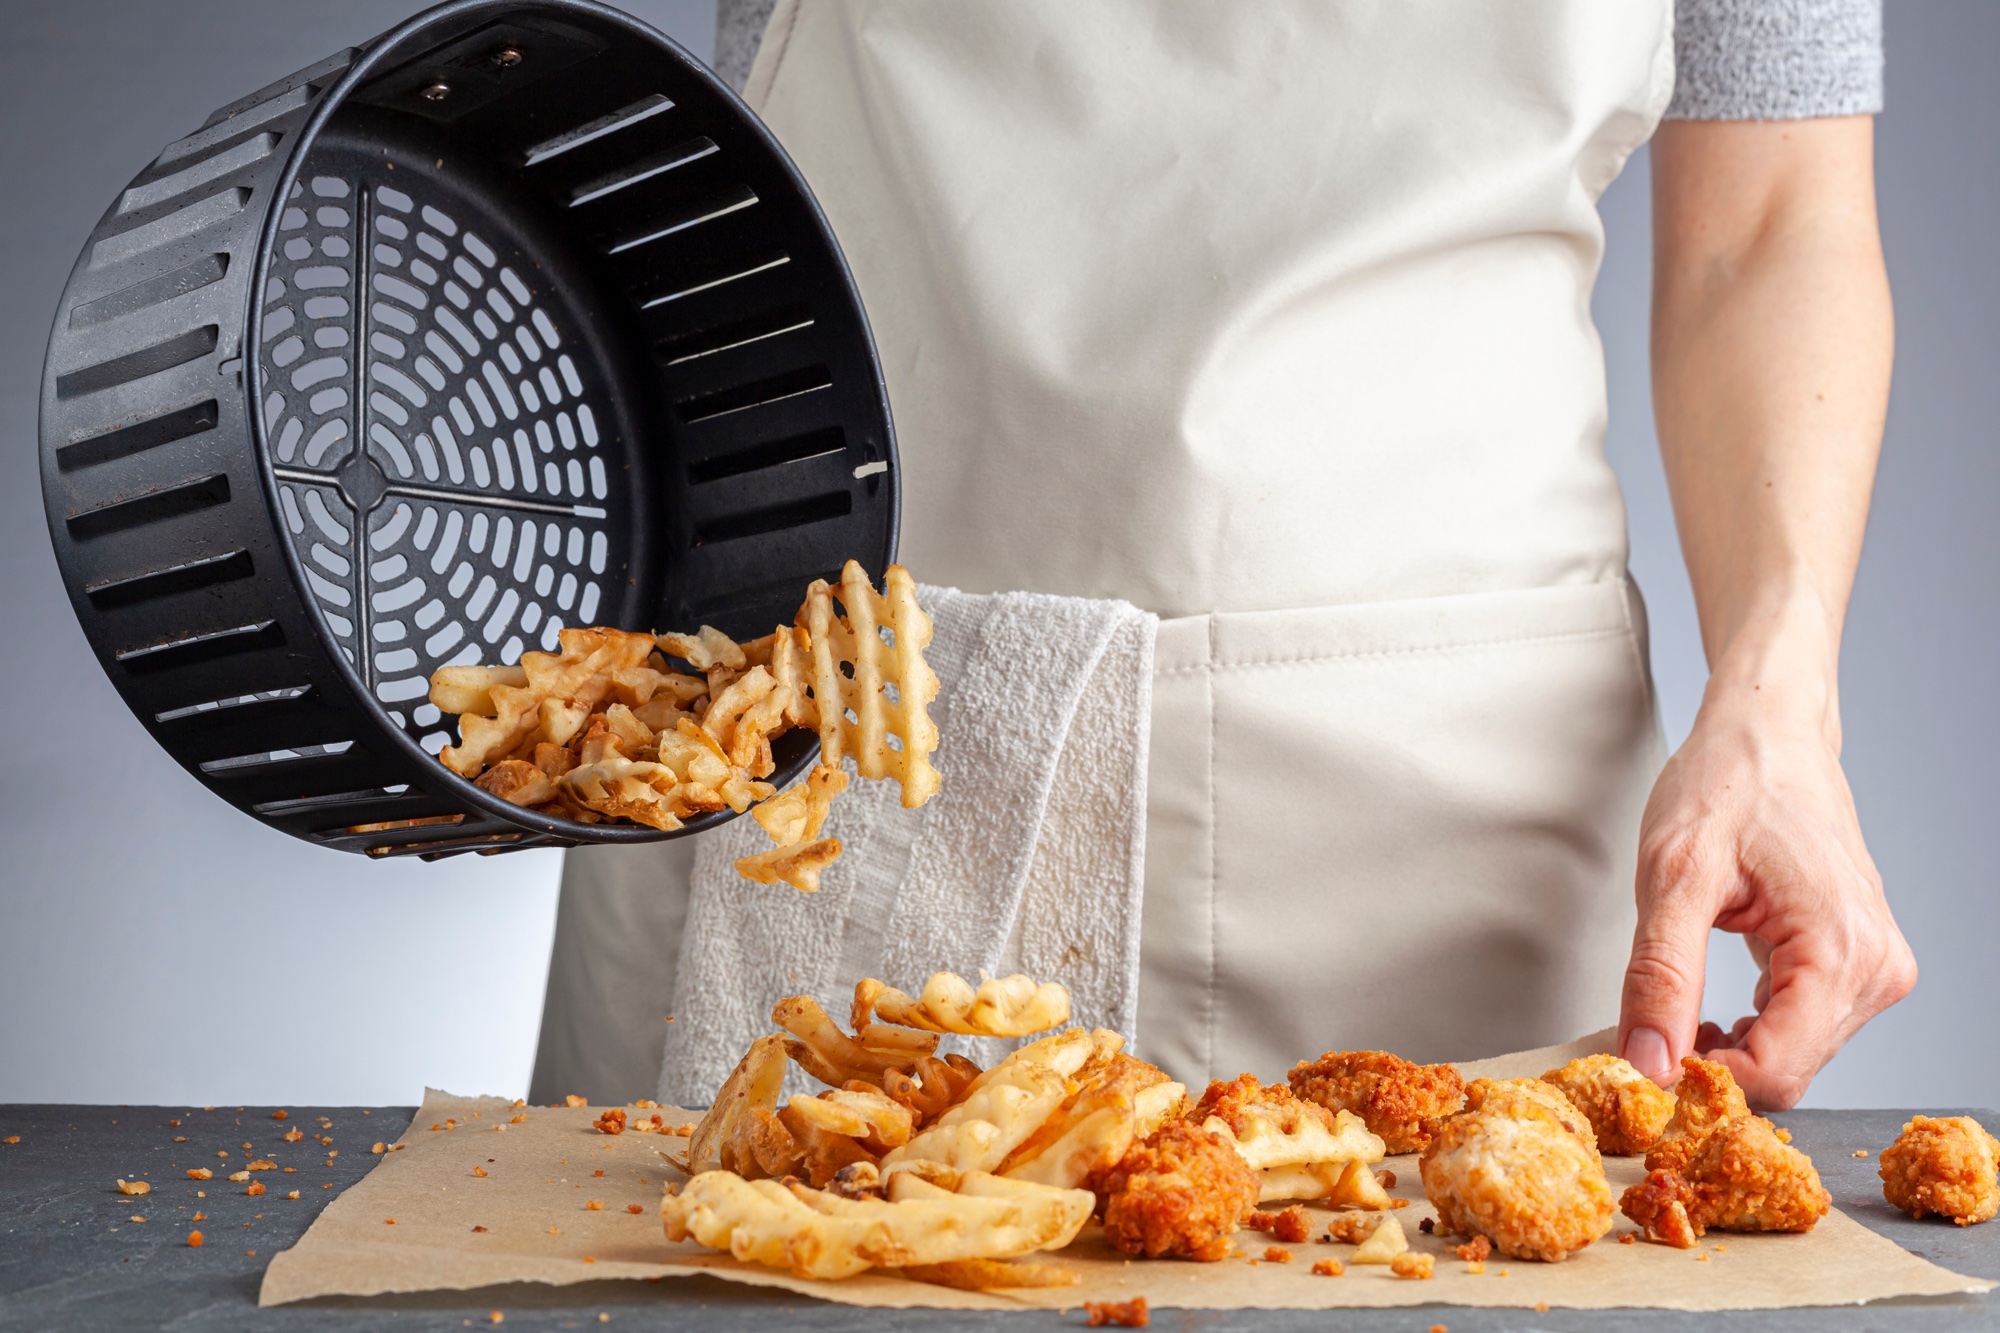 What to cook in an air fryer breaded chicken and chips by VonHaus